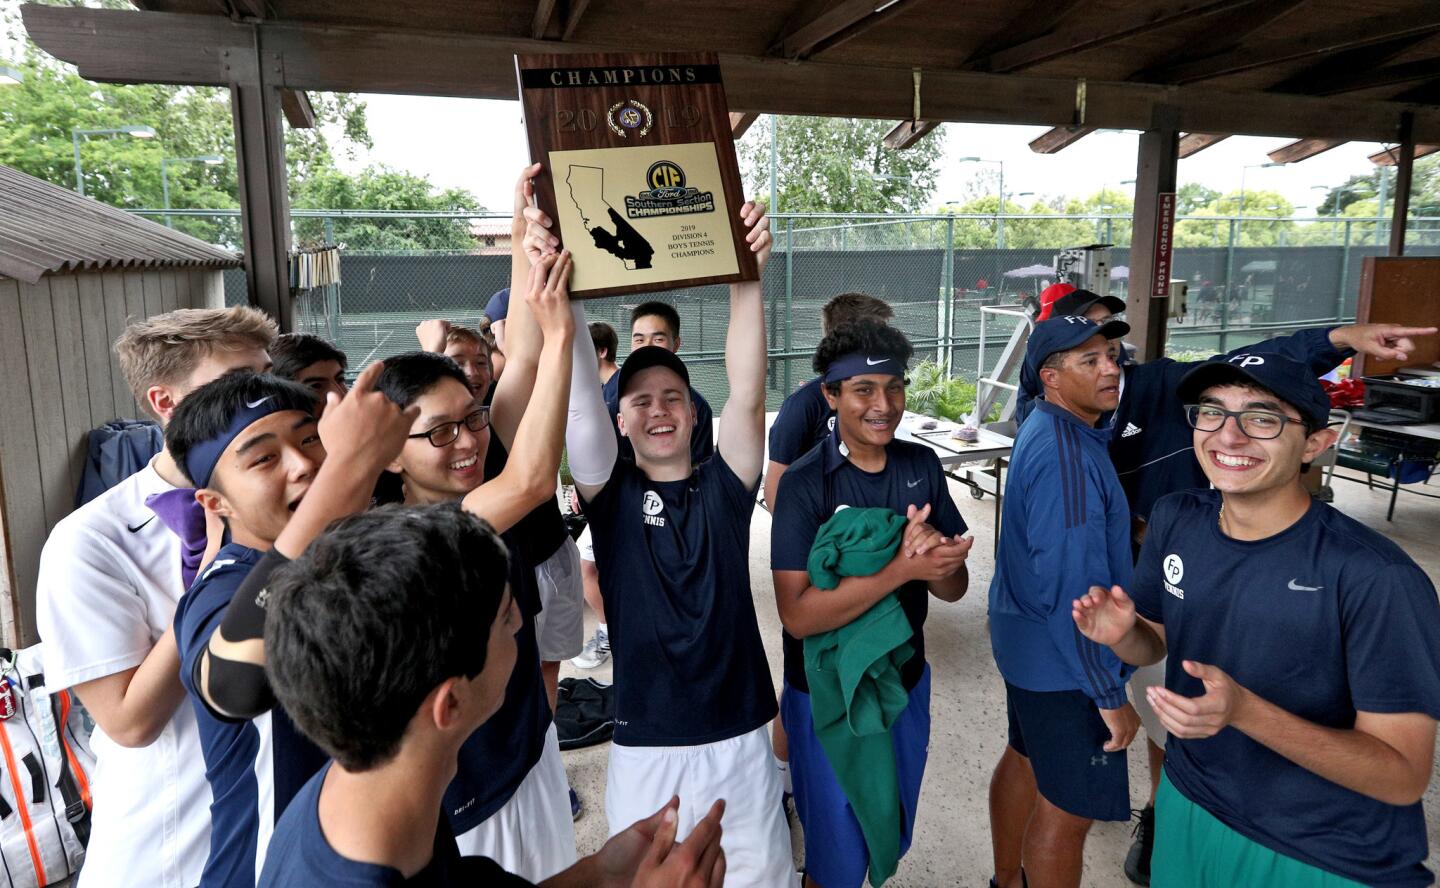 Flintridge Prep tennis team celebrates their win vs. Maranatha High in the CIF Southern Section 2019 Boys Team Tennis Championships, division 4, at The Claremont Club in Claremont on Friday, May 10, 2019.